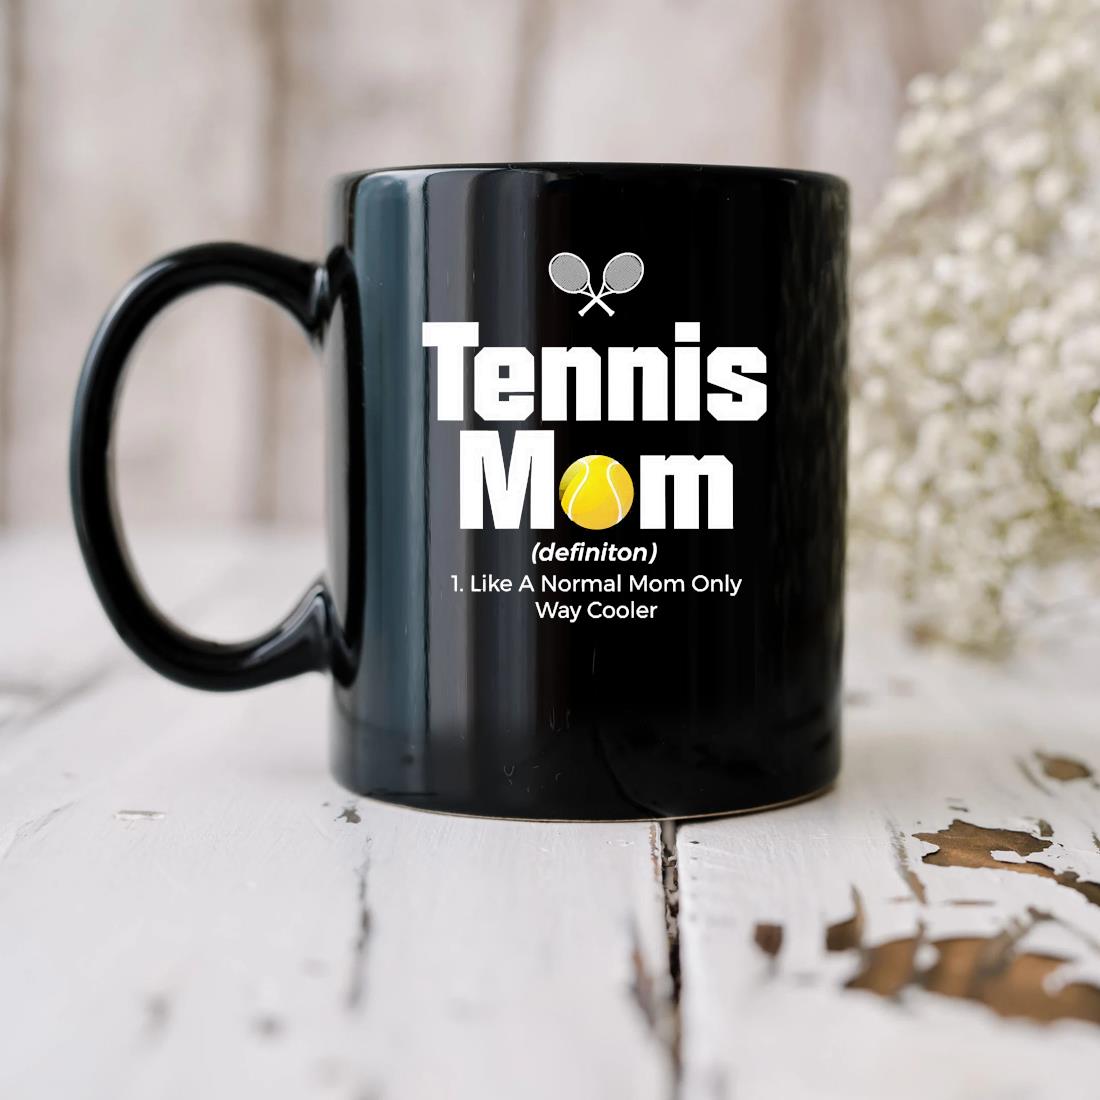 Tennis Mom Definition 1. Like A Normal Mom Only Way Cooler Mug